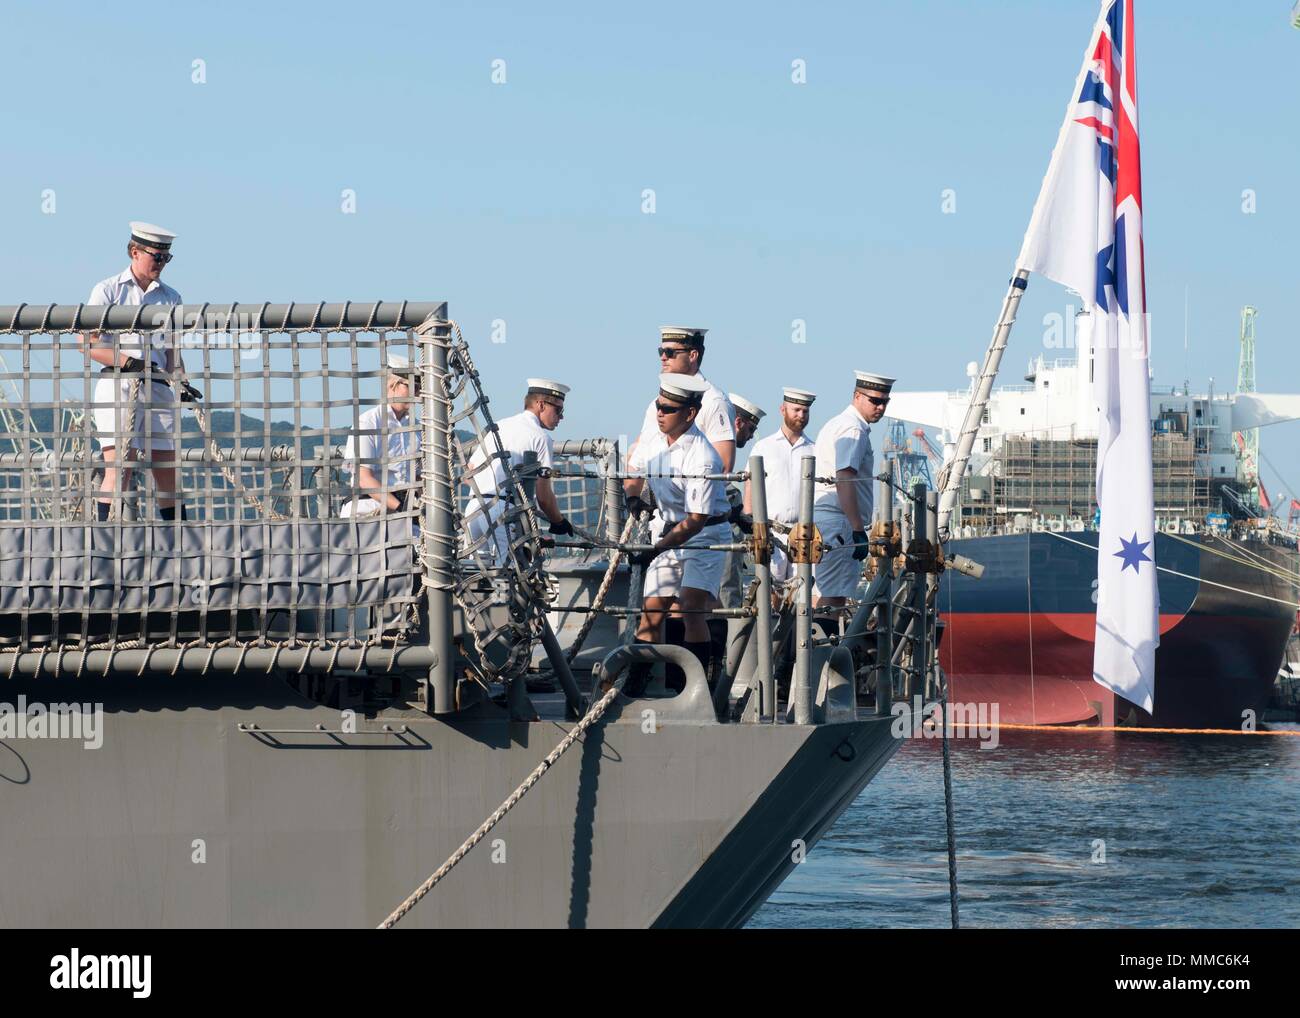 171008-N-RY519-0043 SASEBO, Japan (Oct. 9, 2017) Sailors assigned to the Royal Australian Navy Adelaide-class guided-missile frigate HMAS Melbourne (FFG 05) pull in mooring line as the ship moors at U.S. Fleet Activities Sasebo for a routine port visit. (U.S. Navy photo by Mineman 3rd Class Zachary S. Horvath/Released) Stock Photo